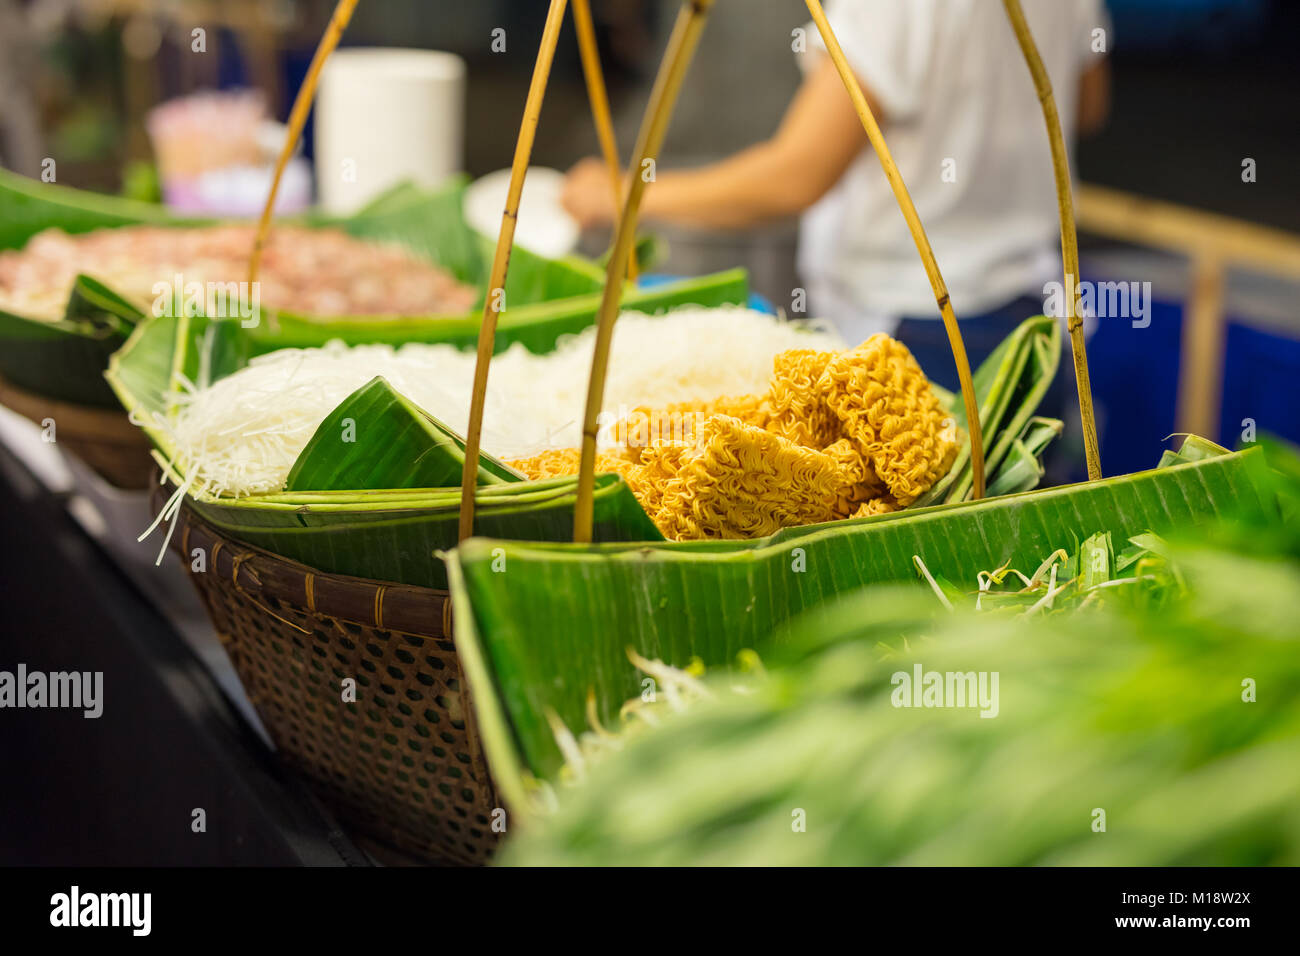 Noodles And Veggies Displayed In Food Market Stock Photo